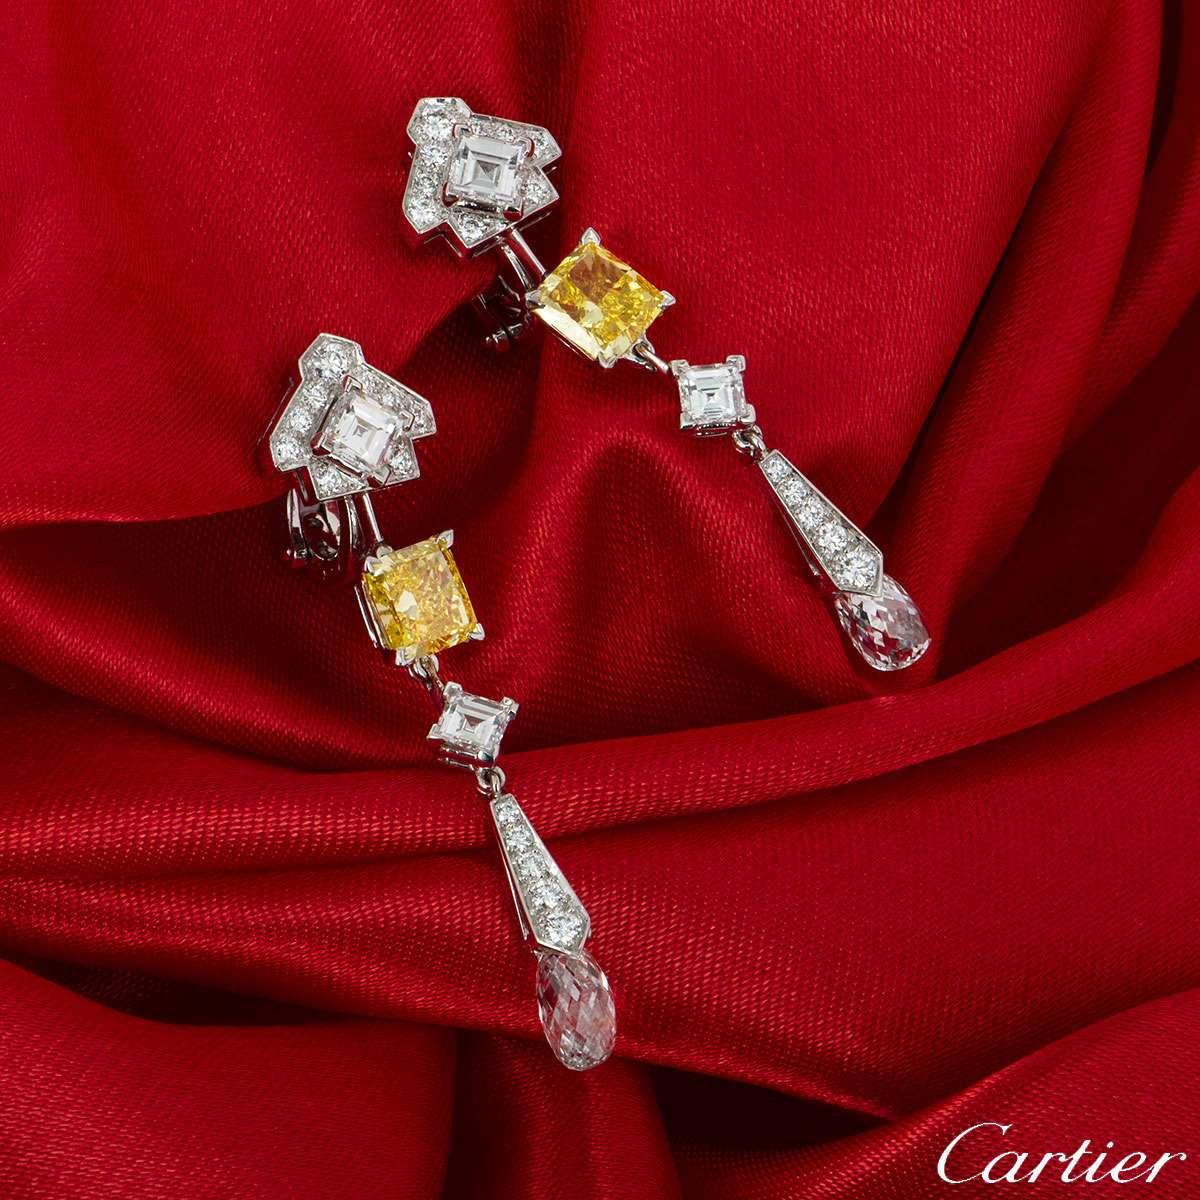 Retailing for £250,000 in 2012, we present a magnificent pair of platinum diamond drop earrings from the Mousseline collection by Cartier. Each earring features a mixture of square emerald cut, round brilliant cut and briolette cut white diamonds.